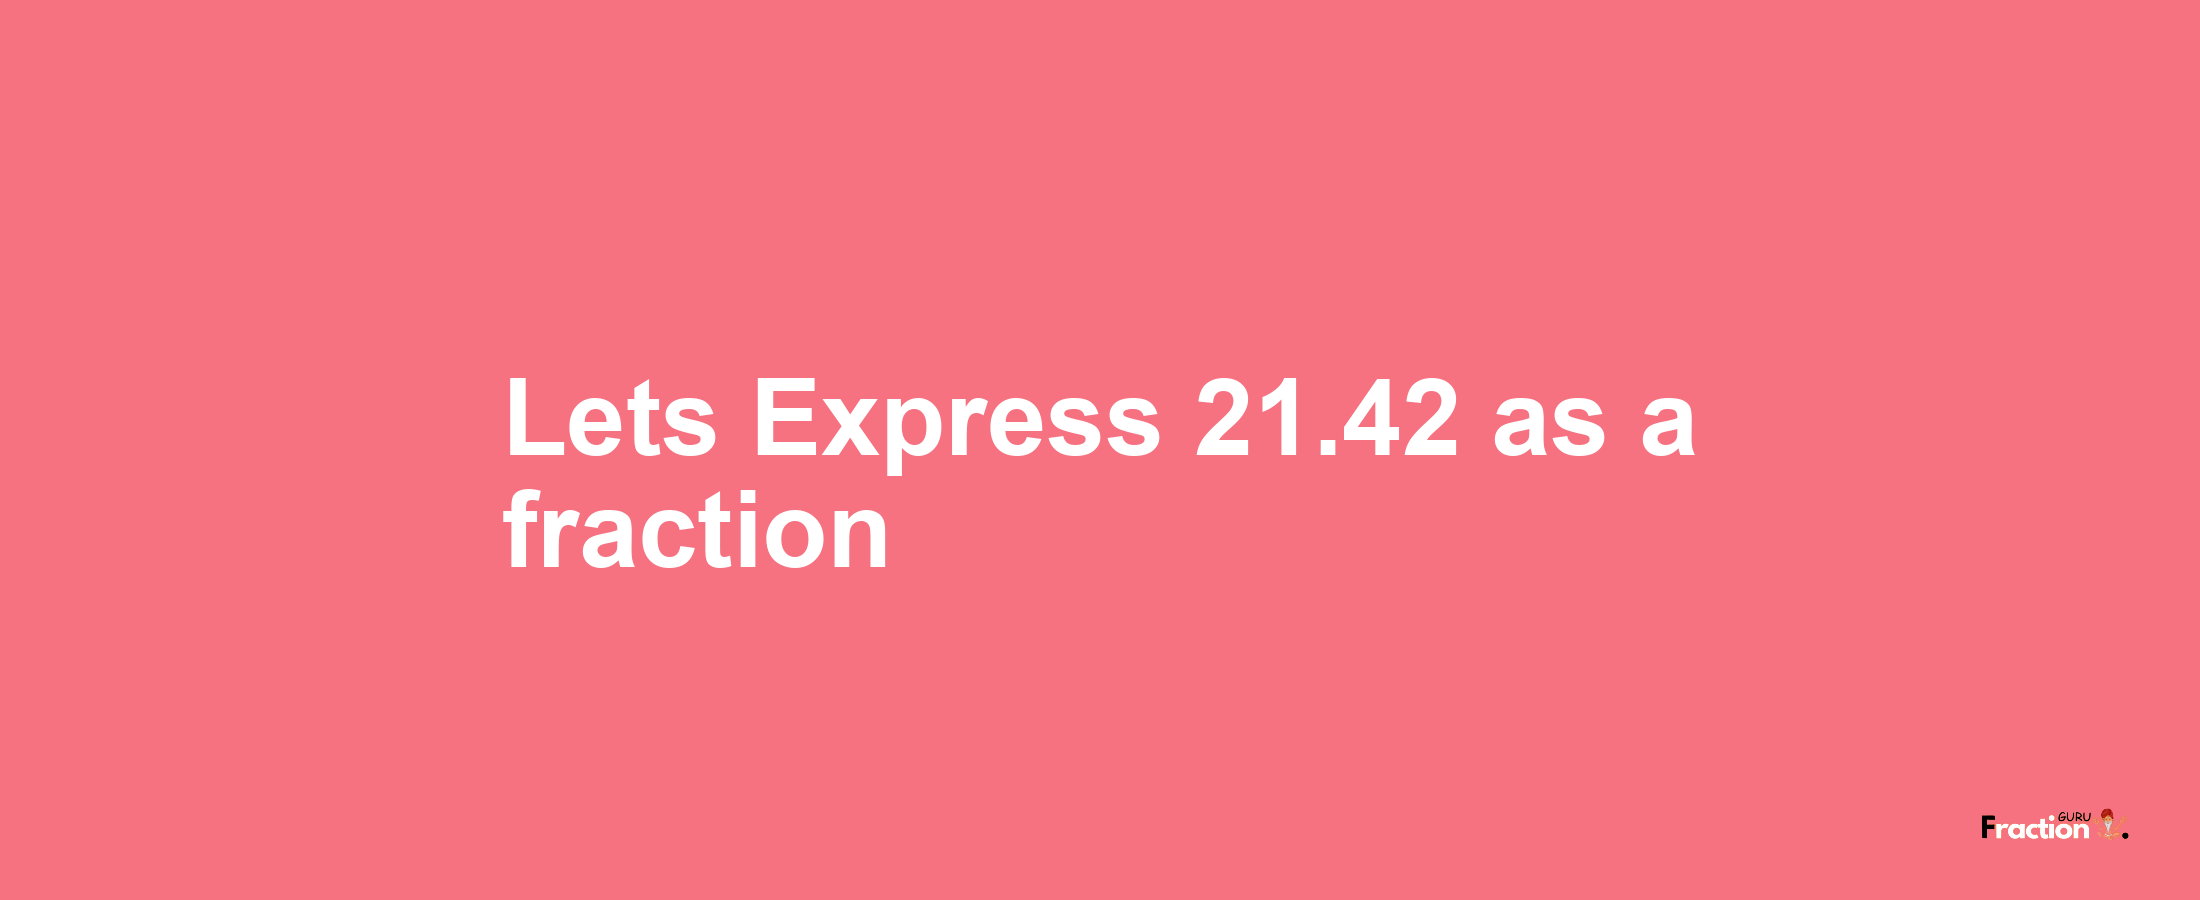 Lets Express 21.42 as afraction